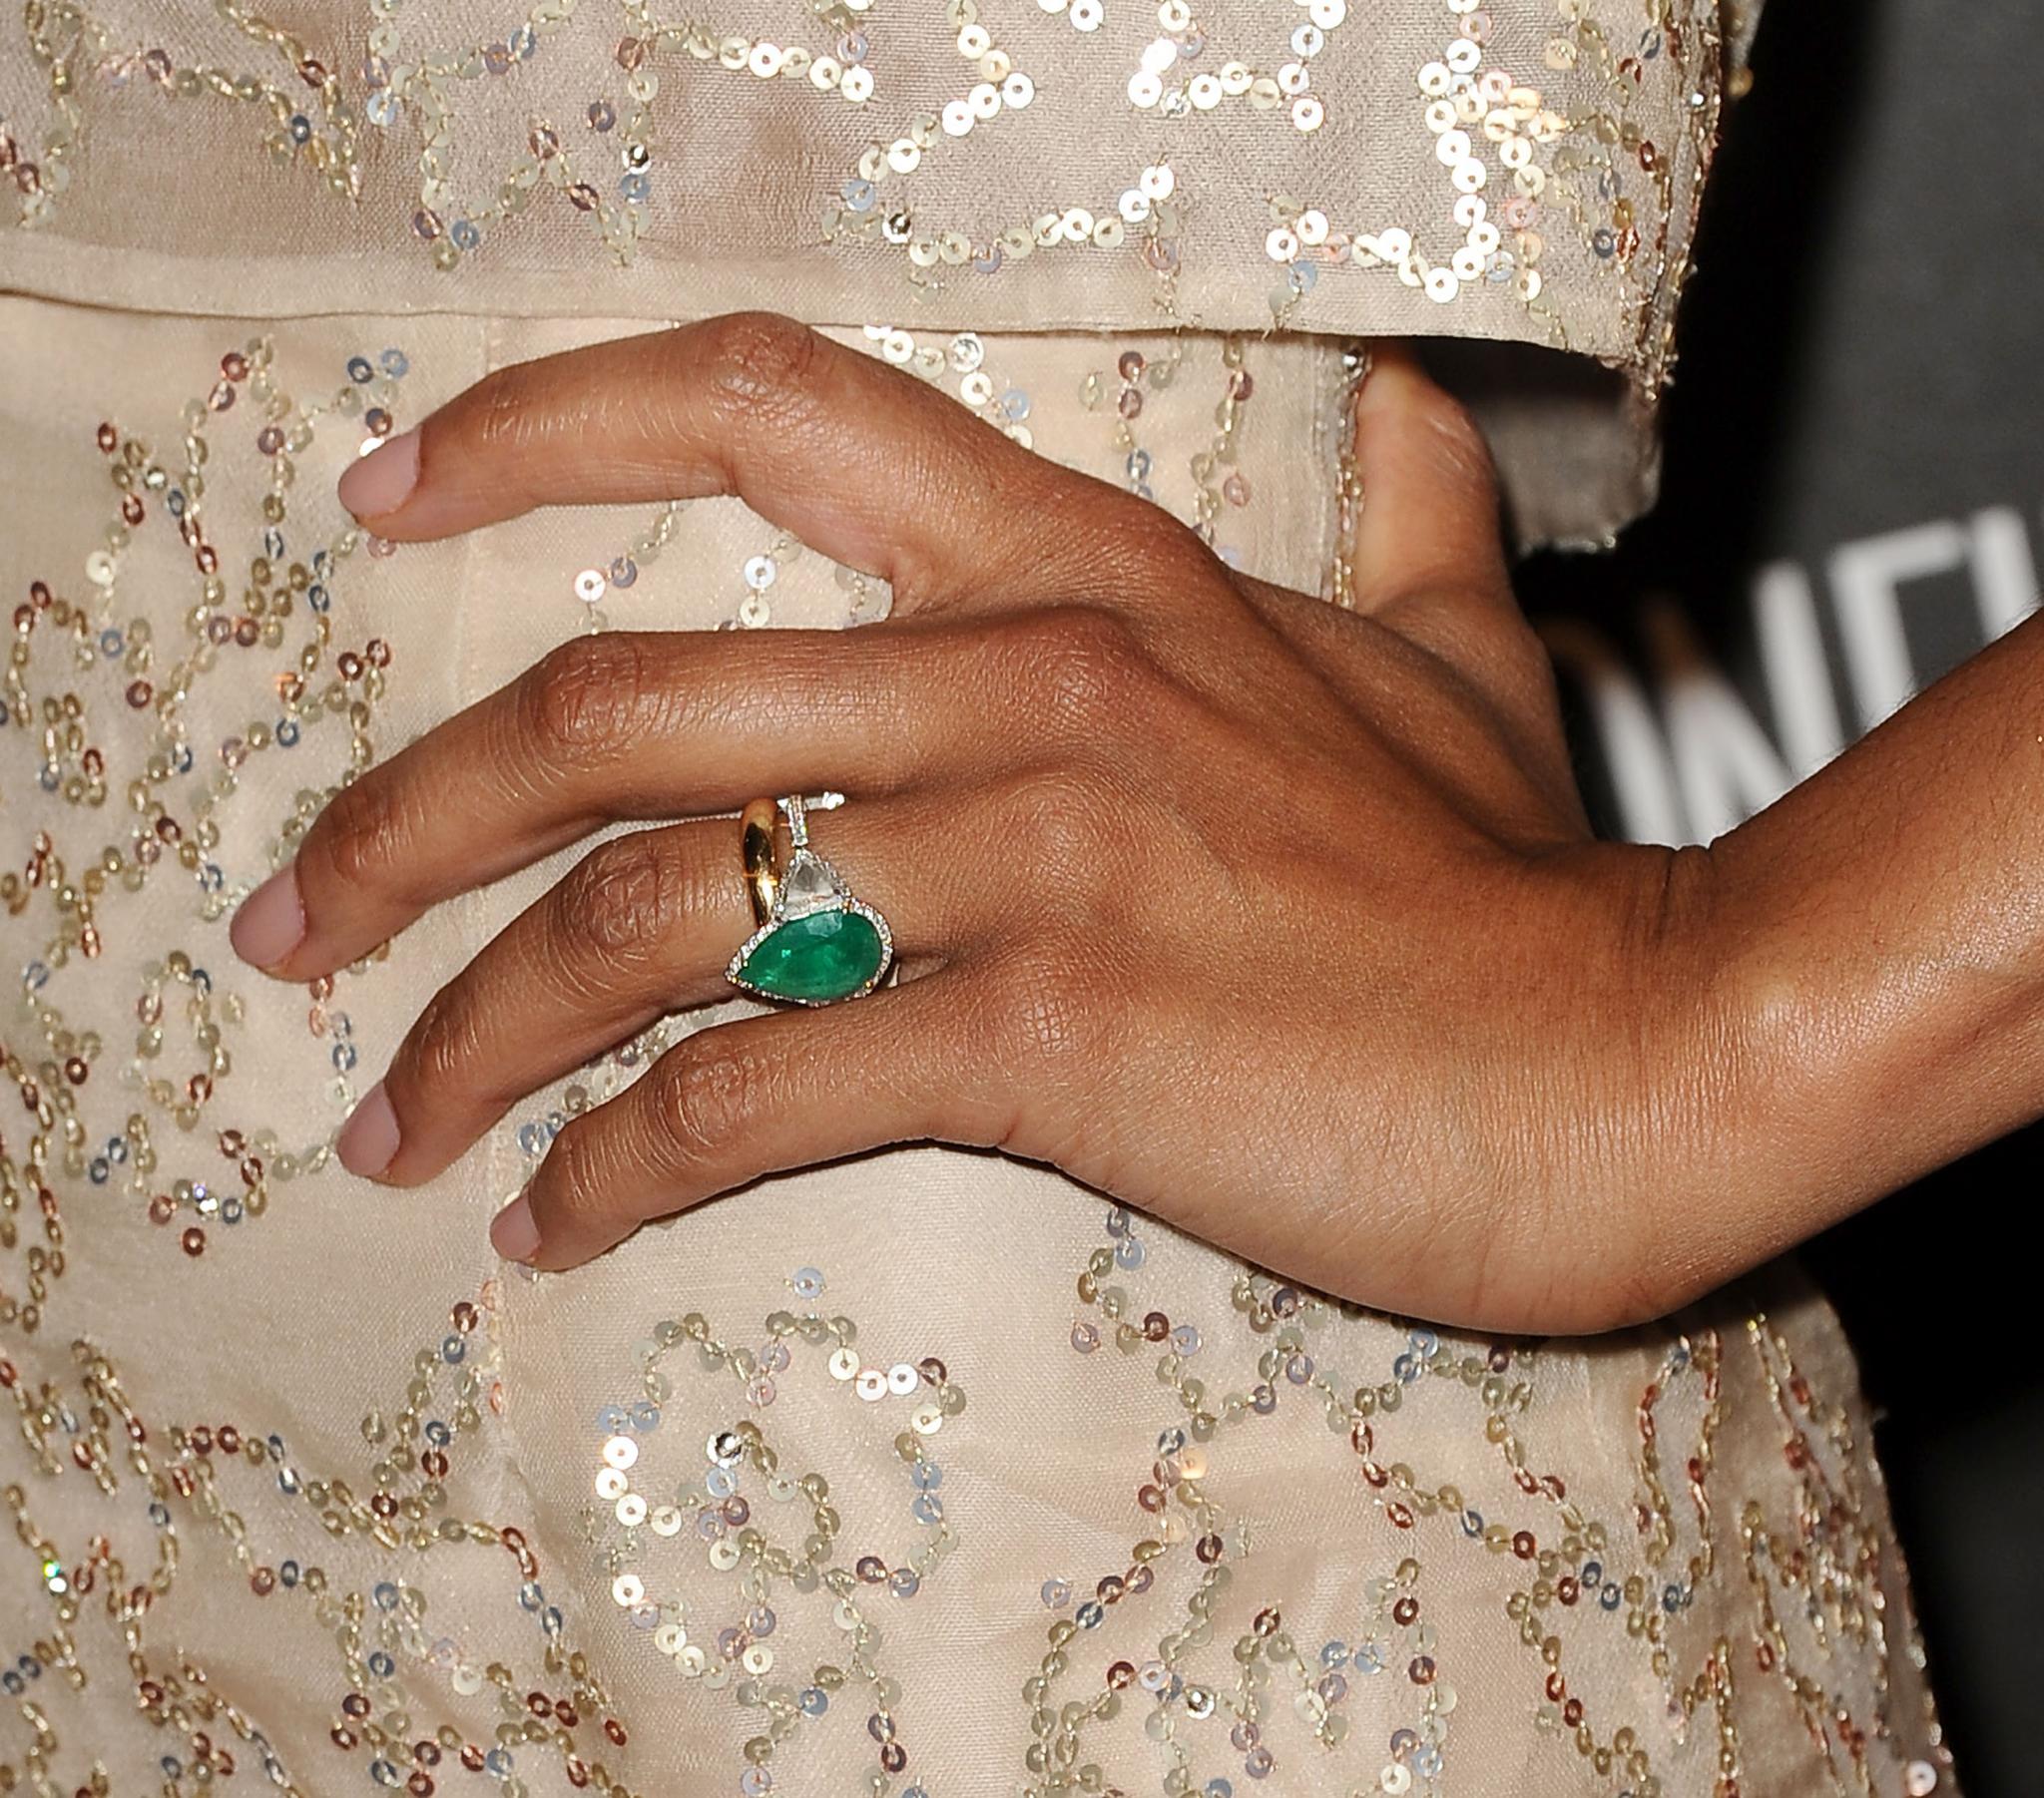 17 Celeb Engagement Rings That Have Us Swooning | Essence